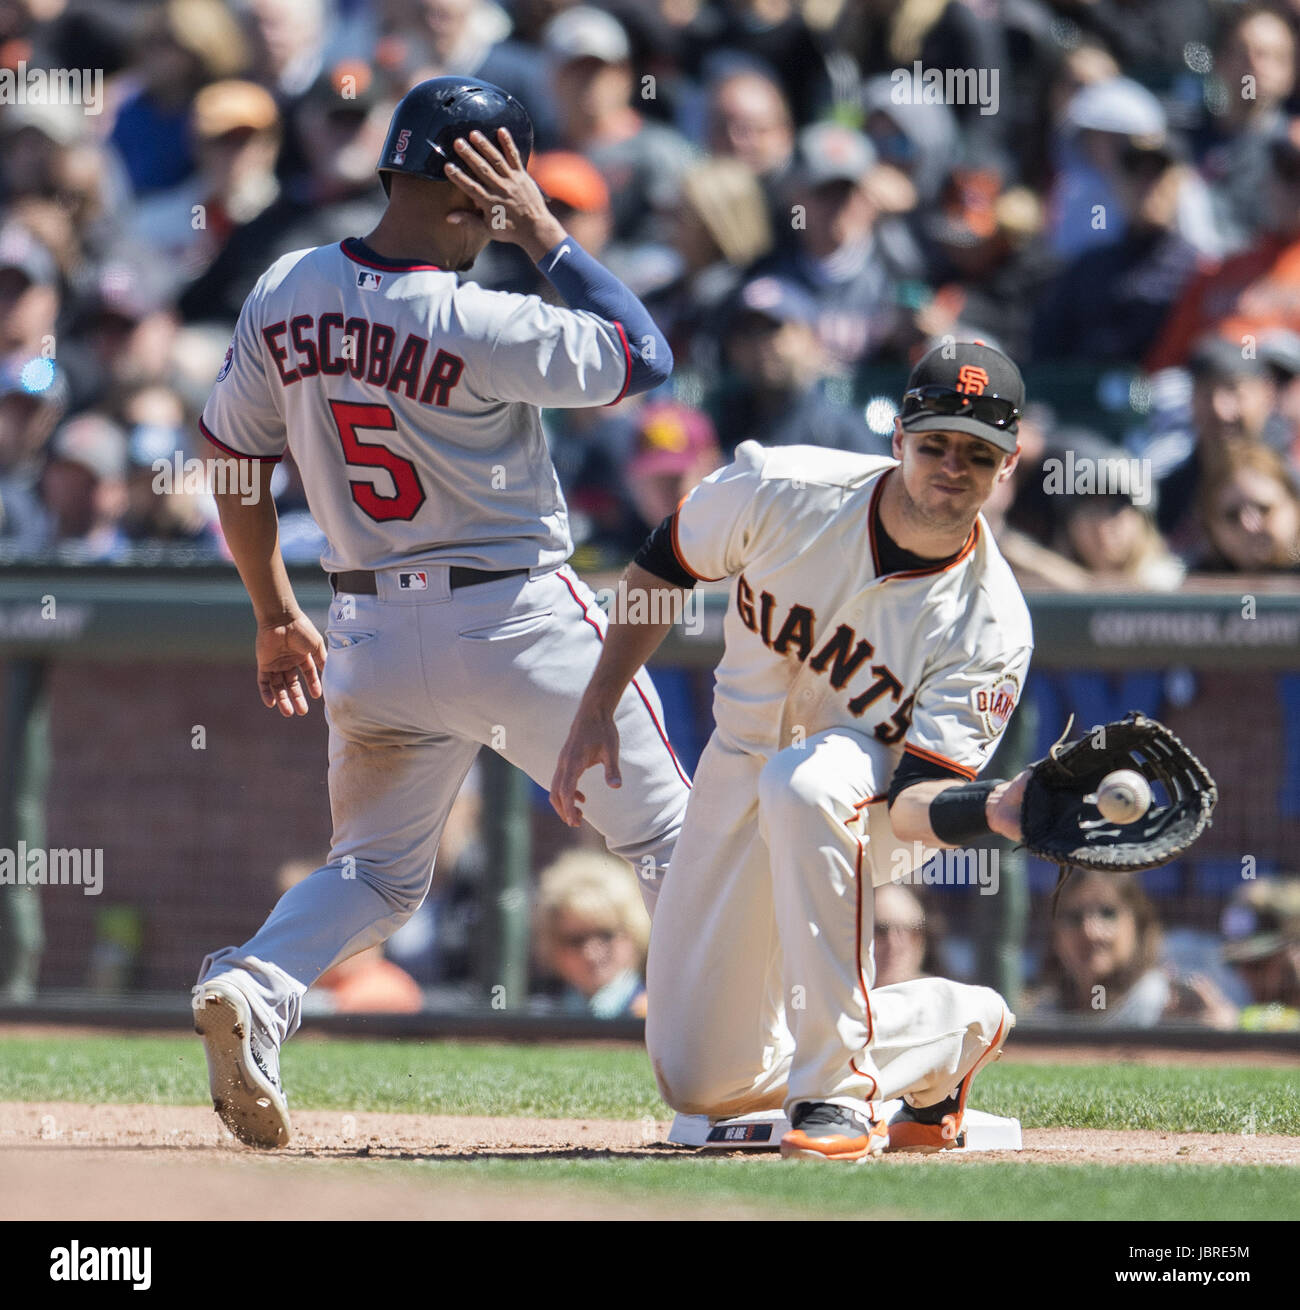 San Francisco, California, USA. 11th June, 2017. San Francisco Giants catcher Buster Posey (28) takes the throw to keep Minnesota Twins third baseman Eduardo Escobar (5) on first base, during a MLB baseball game between the Minnesota Twins and the San Francisco Giants on ''Dog Days of Summer'' at AT&T Park in San Francisco, California. Valerie Shoaps/CSM/Alamy Live News Stock Photo